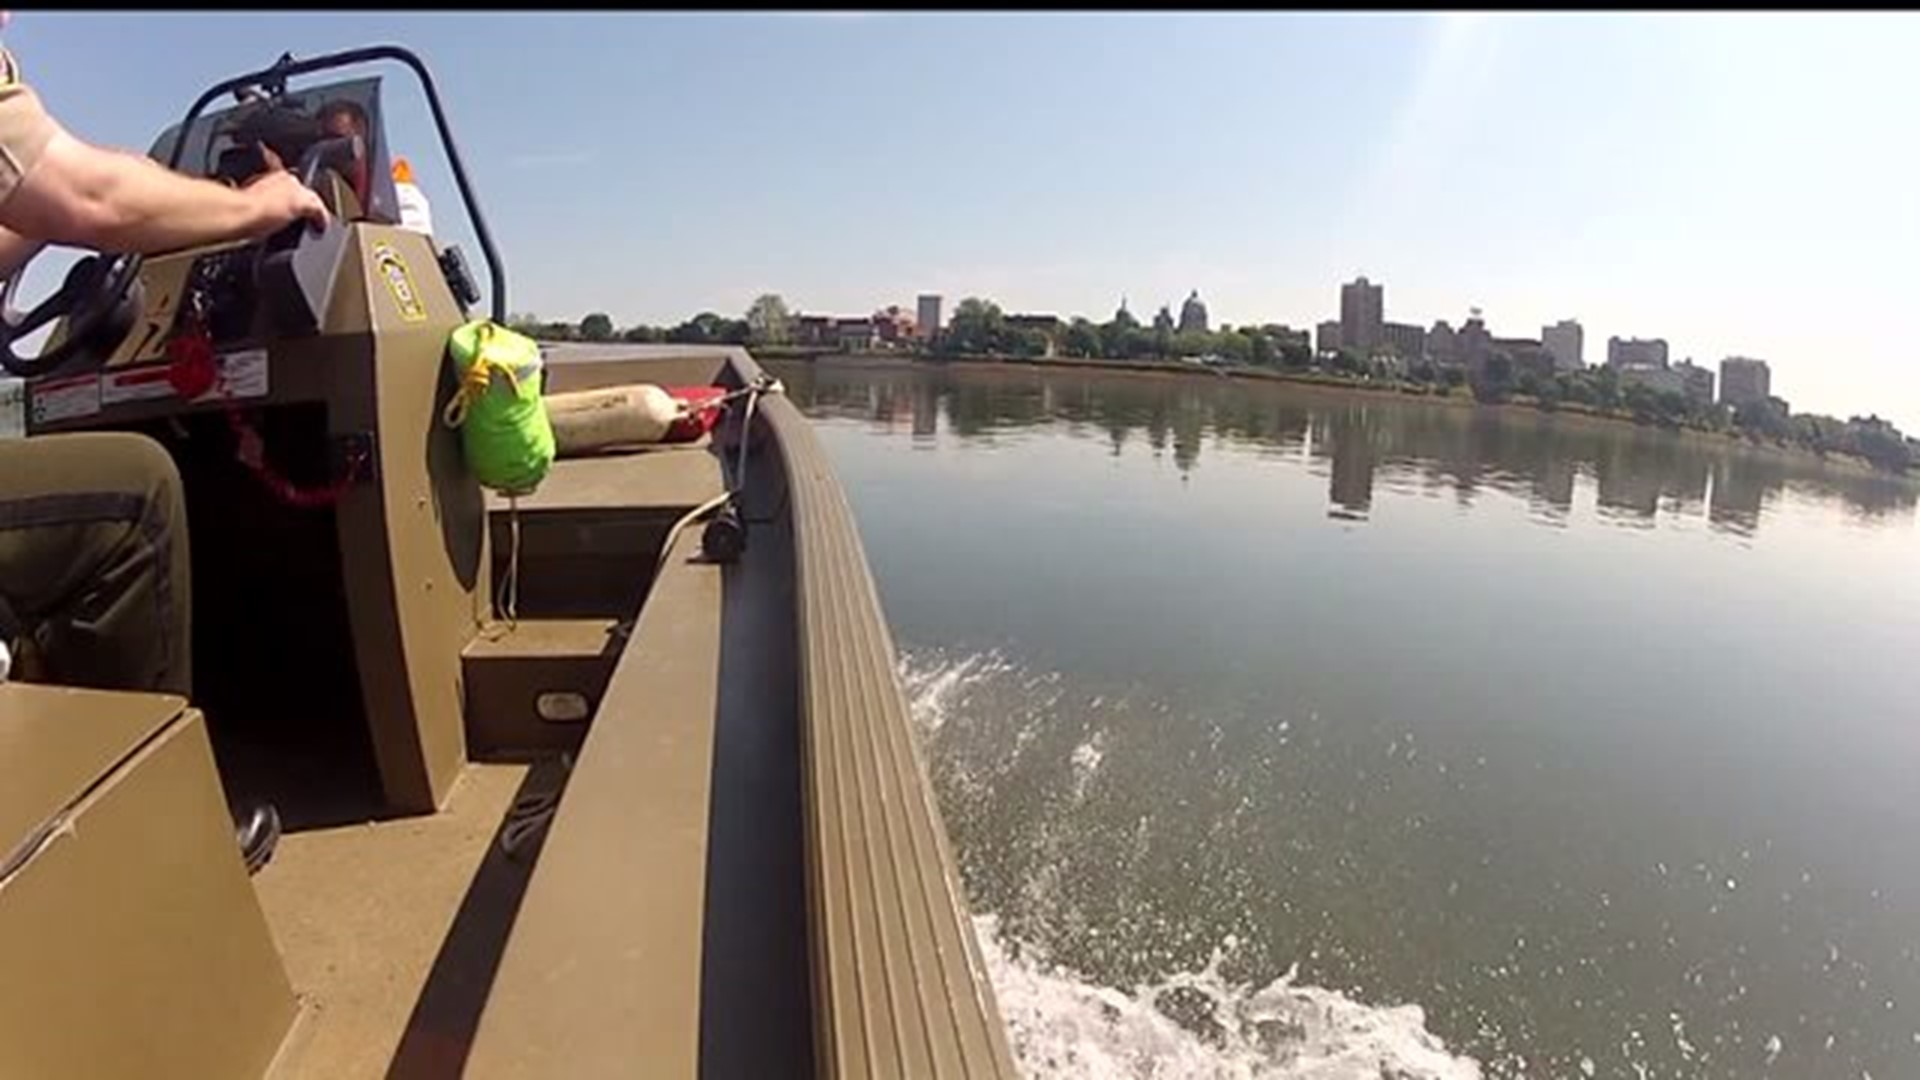 Boating safety for Memorial Day on the Susquehanna River